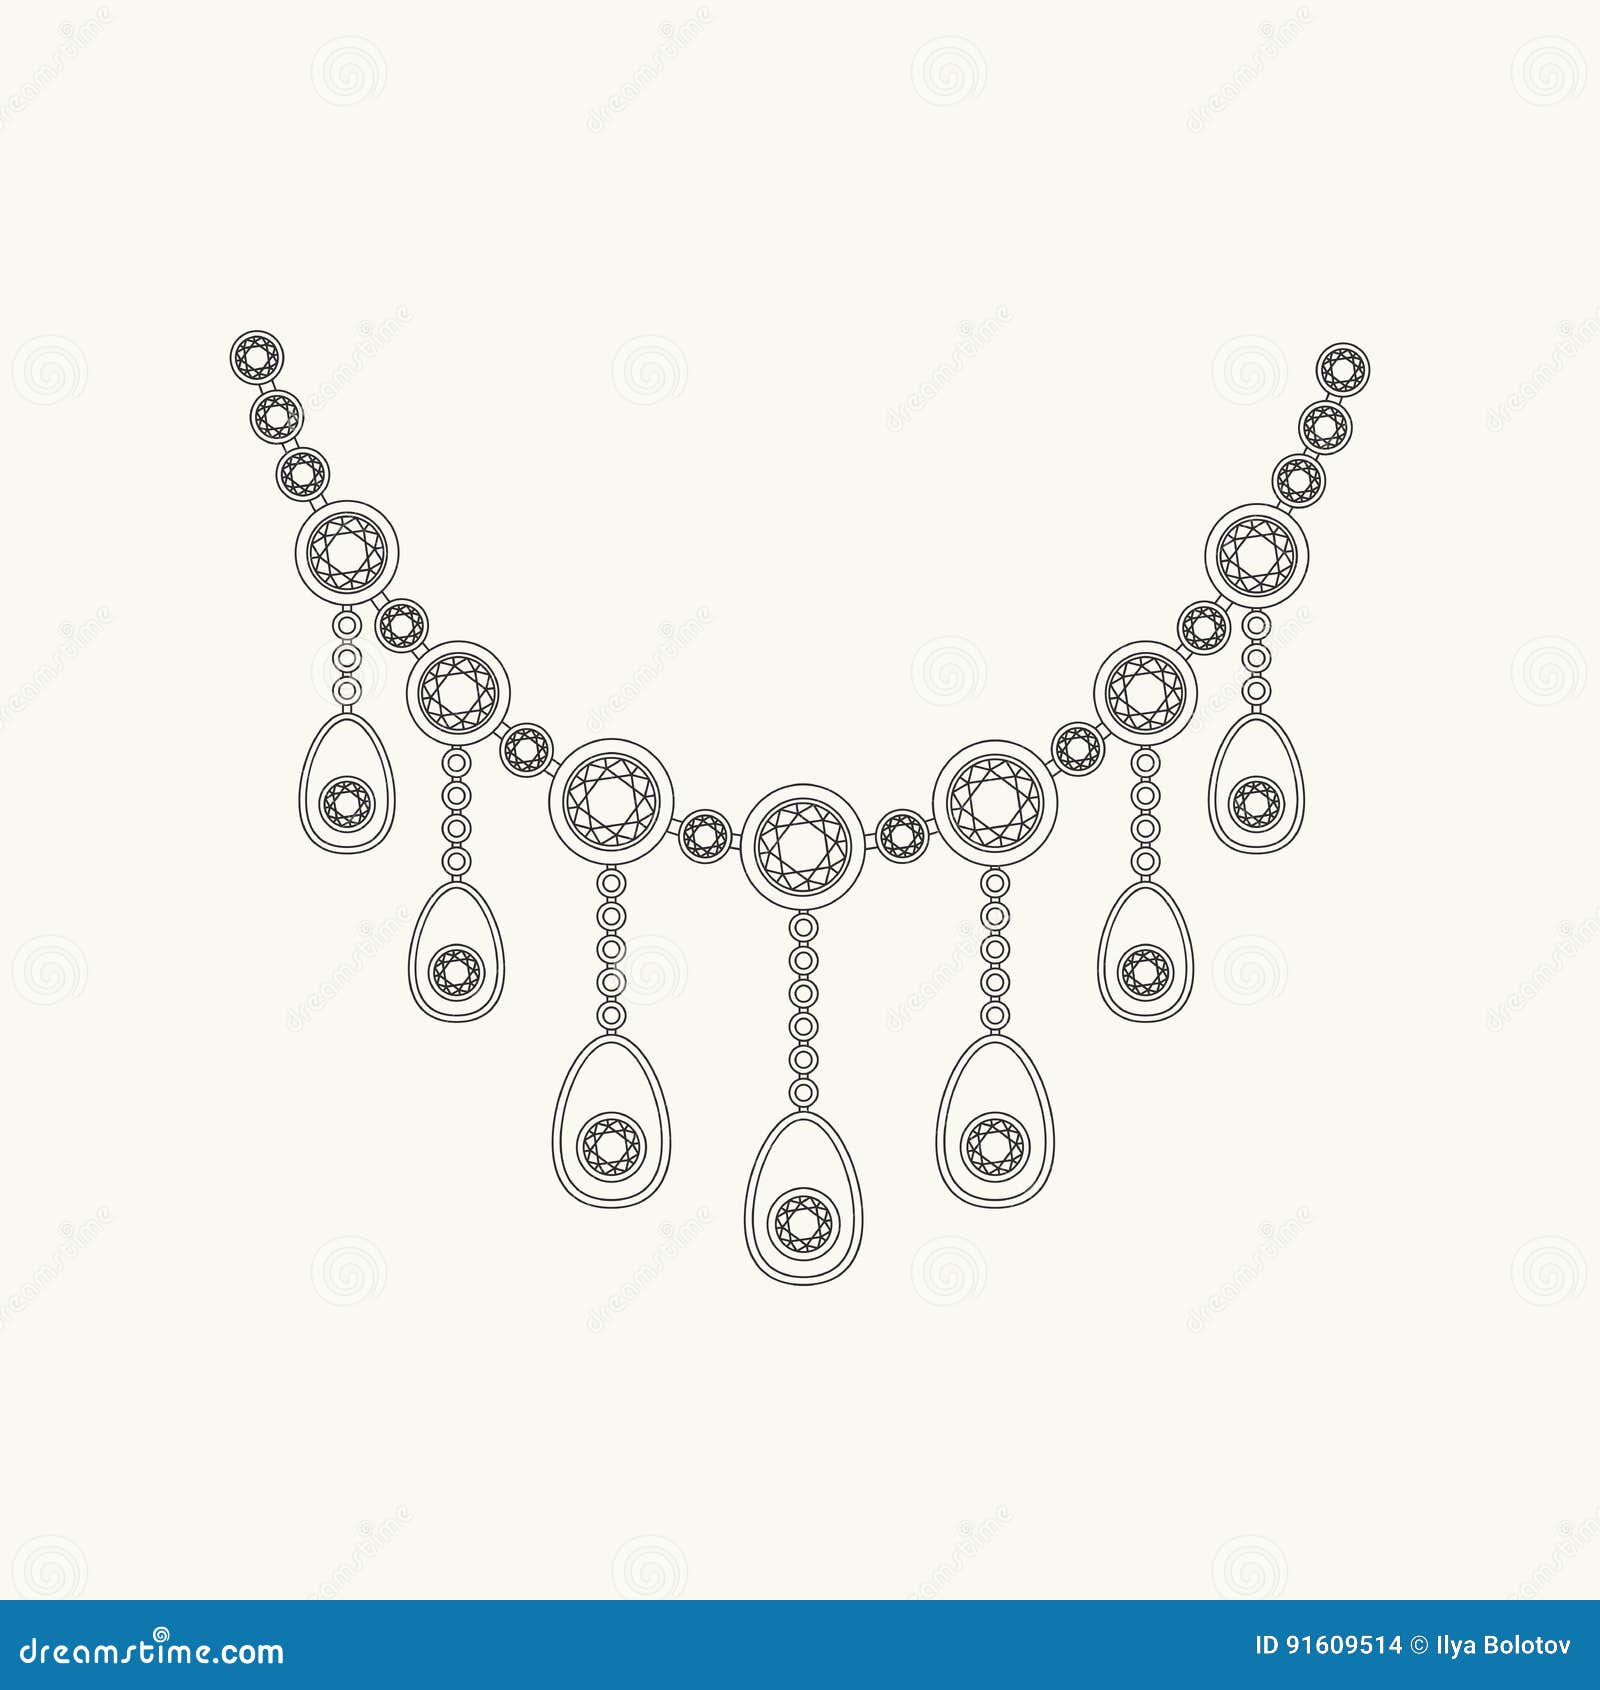 https://thumbs.dreamstime.com/z/necklace-line-drawing-diamonds-vector-thin-illustration-jewelry-accessories-91609514.jpg